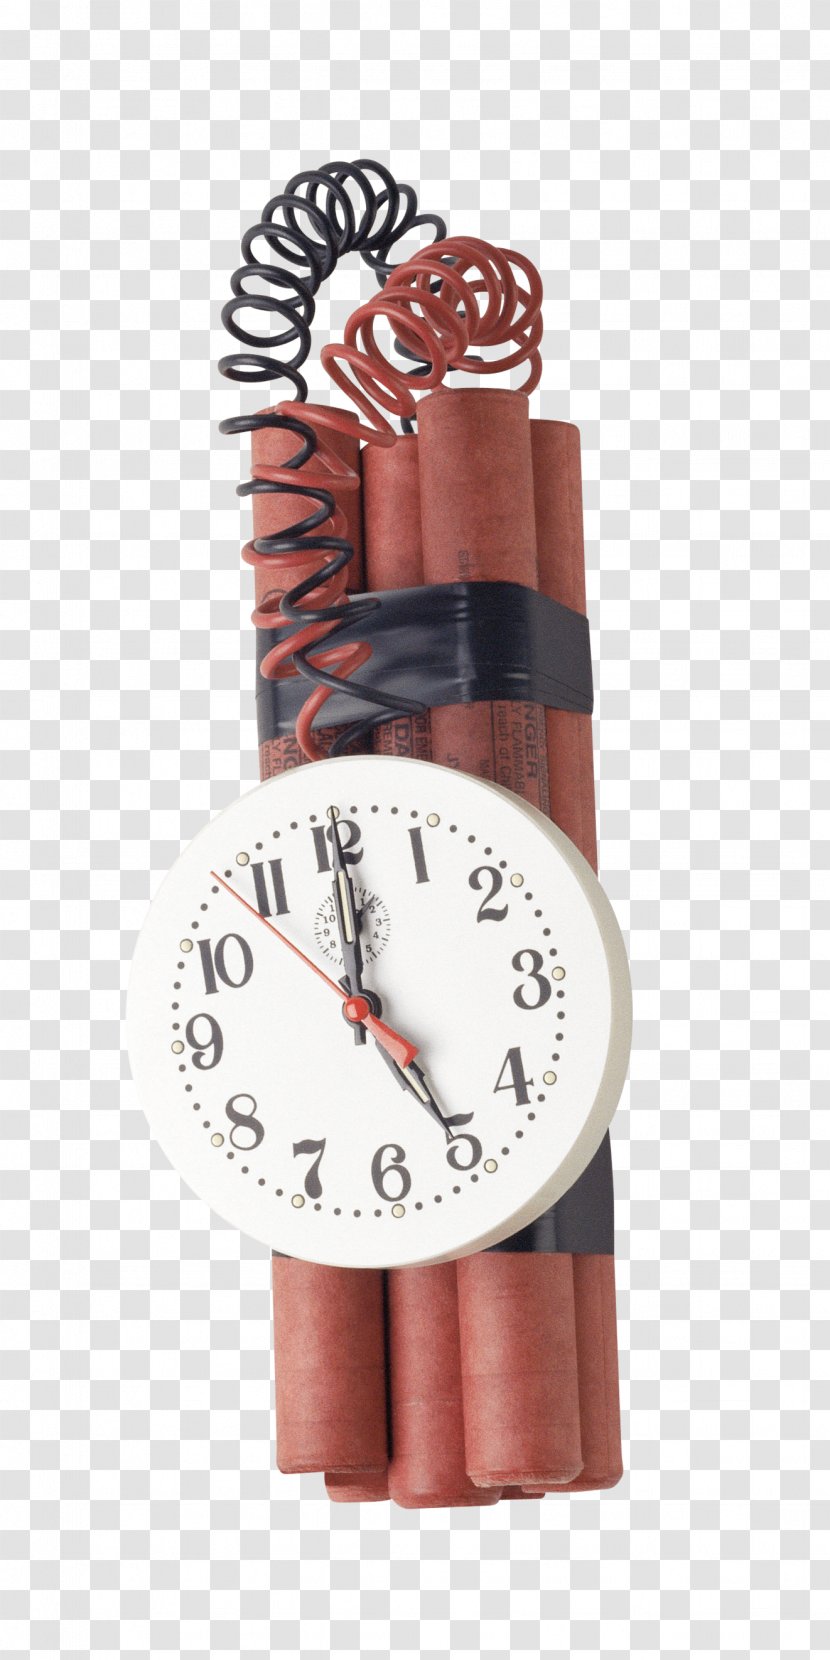 Time Bomb Icon - Watch - Dynamite Transparent PNG